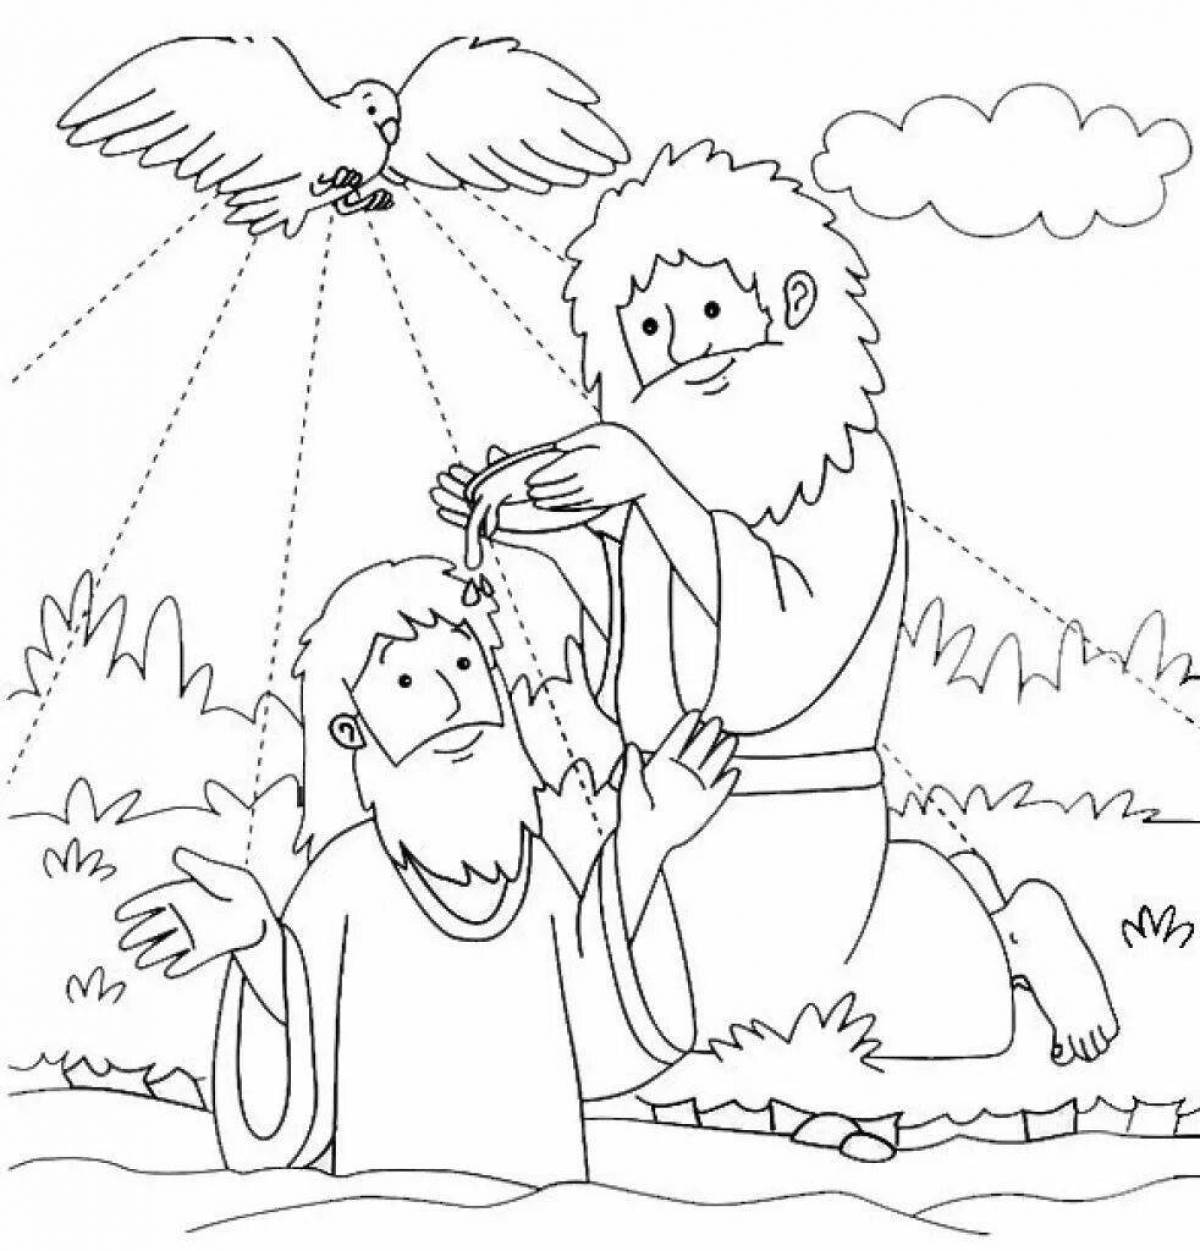 Exquisite christening of Rus' coloring book for kids